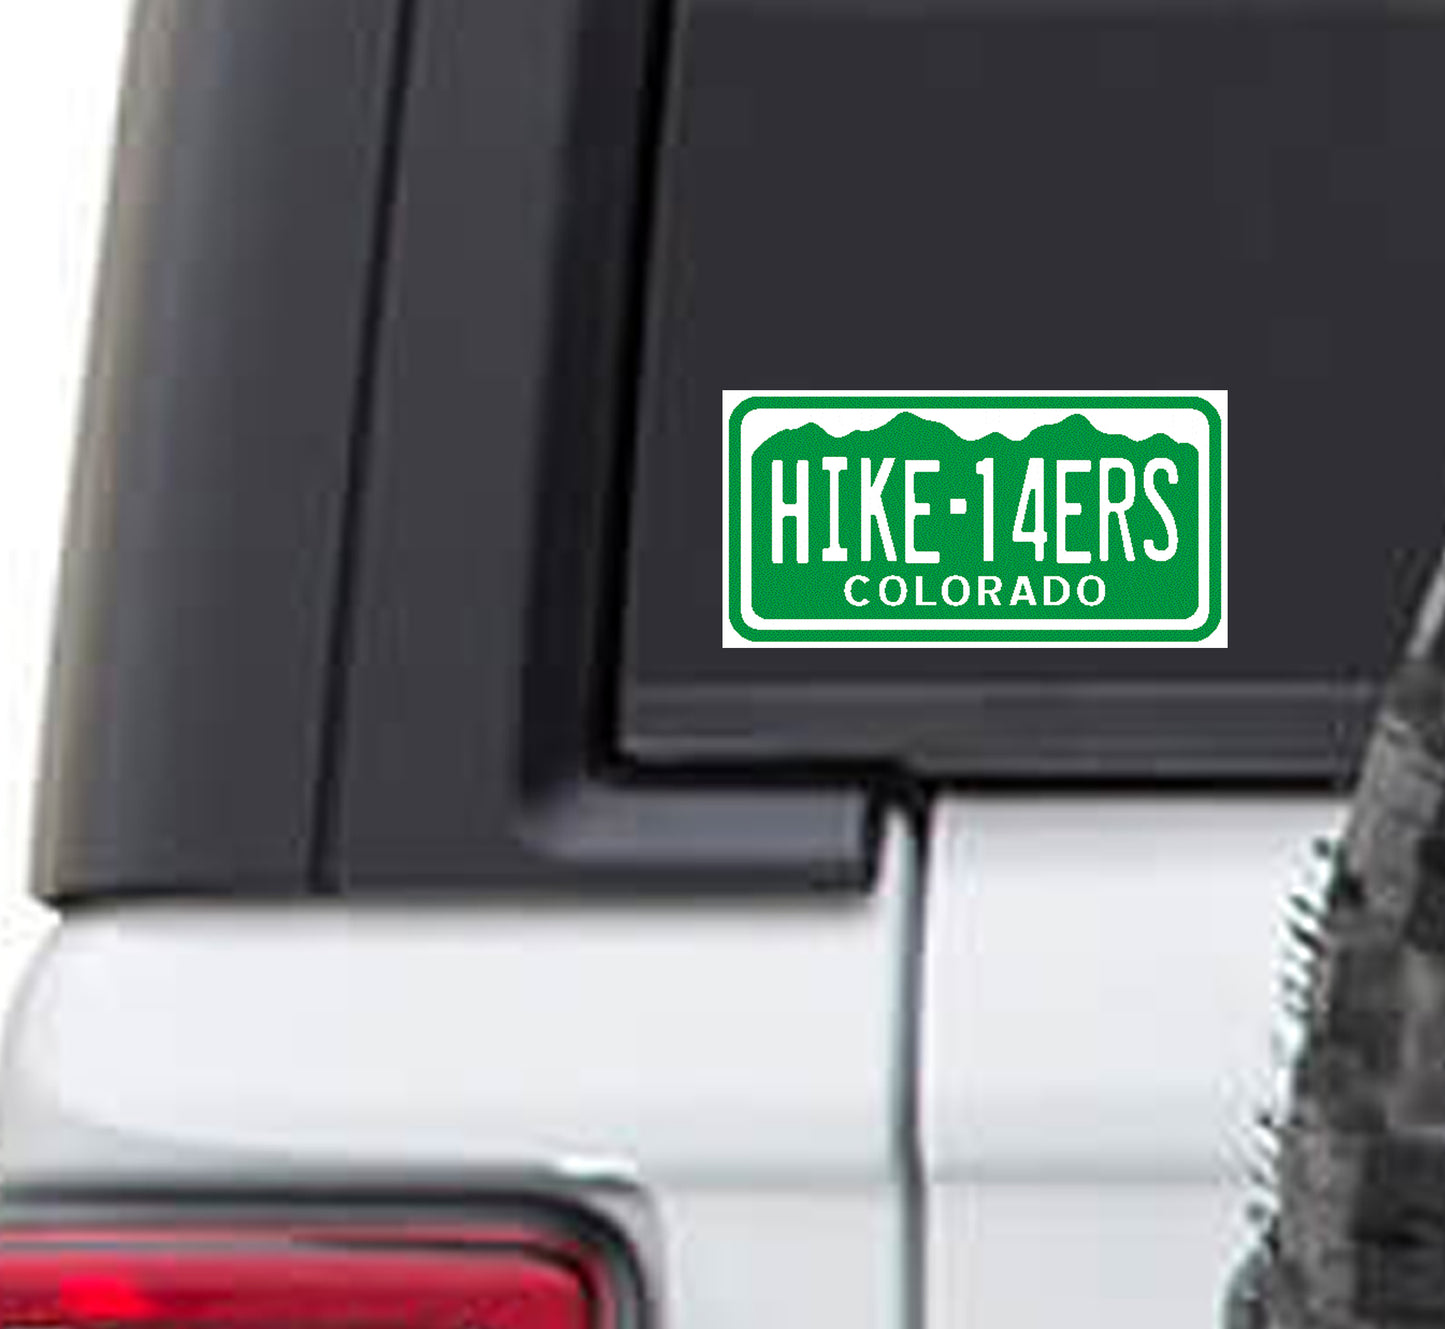 Colorado License Plate Hike 14ers Vinyl Sticker Decal - CO I love colorado camping hiking backpacking hike stickers